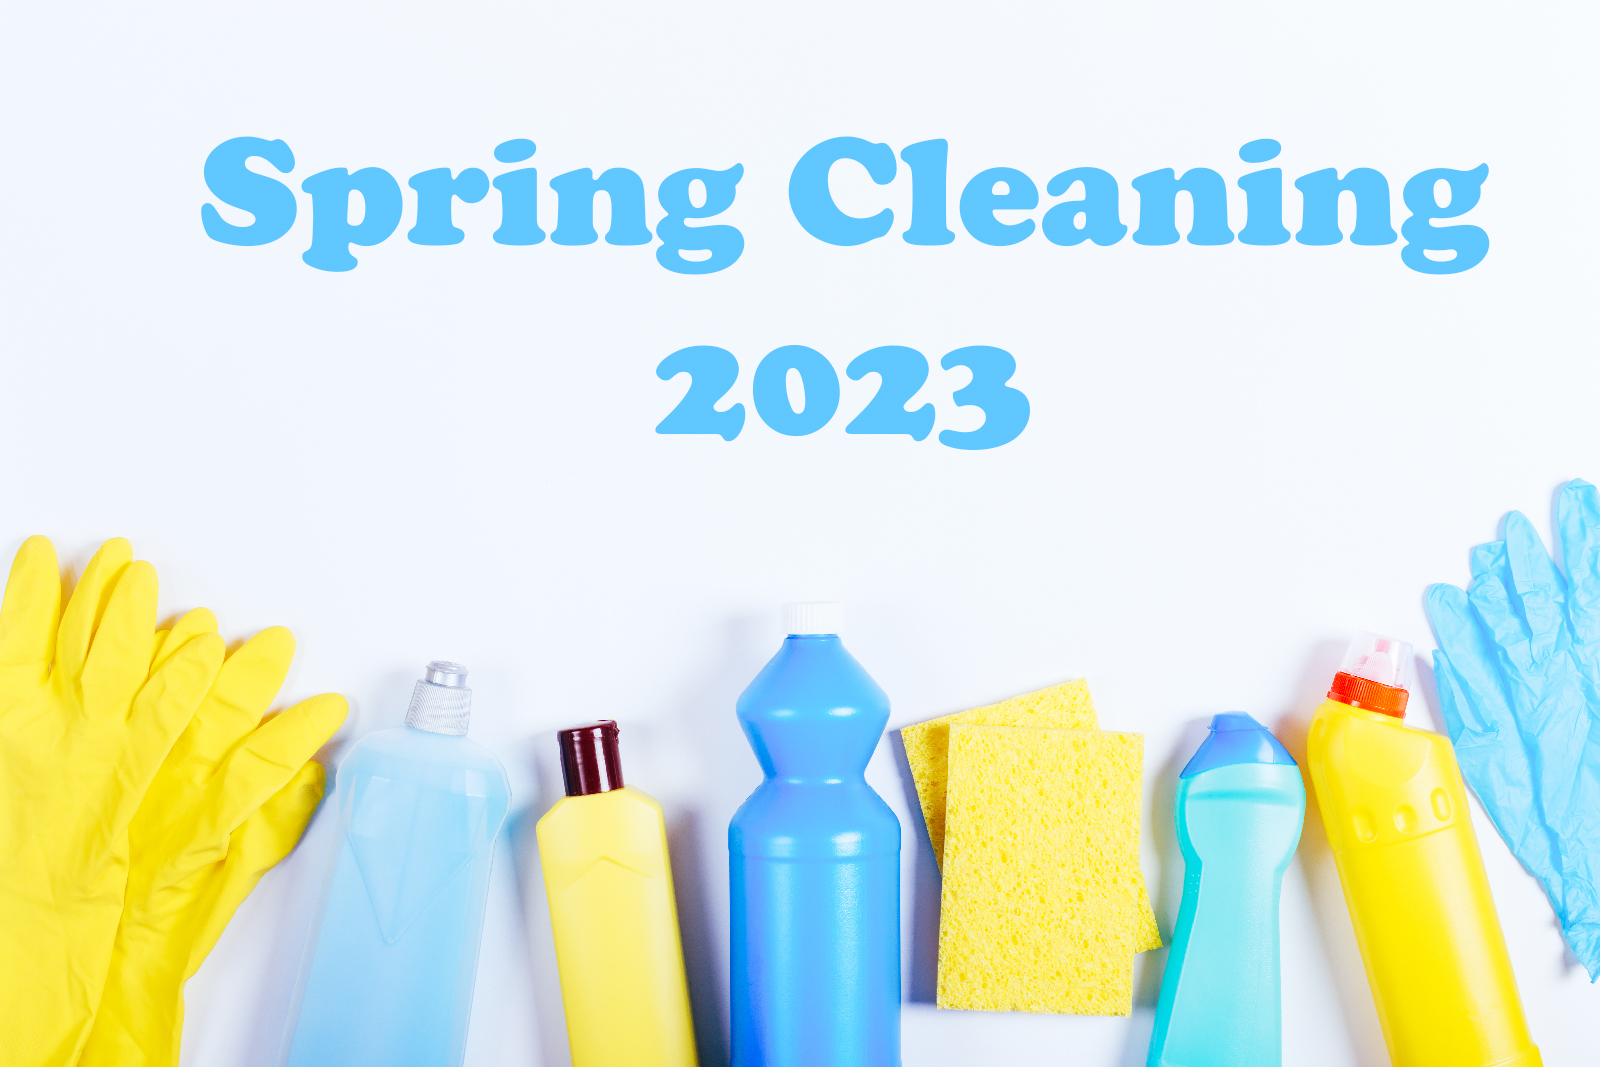 Spring Cleaning 2023